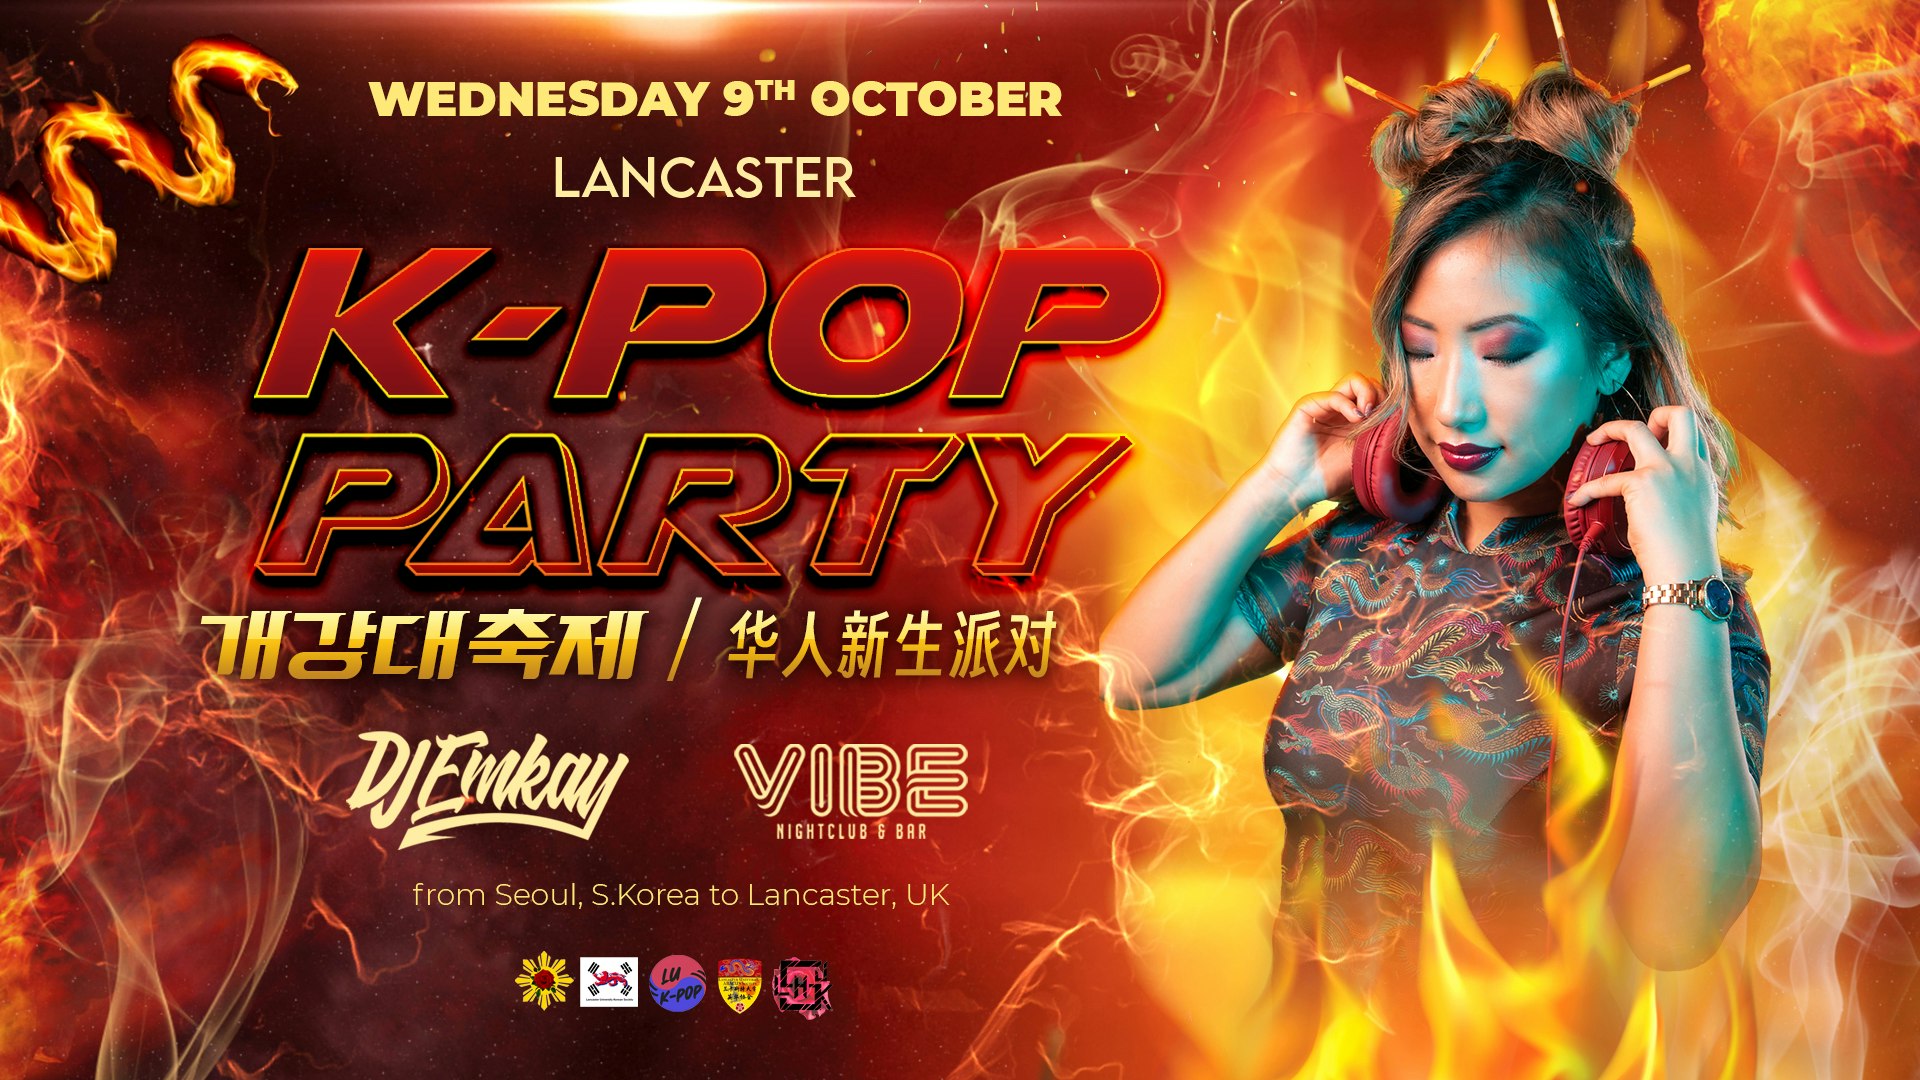 Lancaster K-Pop Party – Fire Tour with DJ EMKAY |  Wednesday 9th October